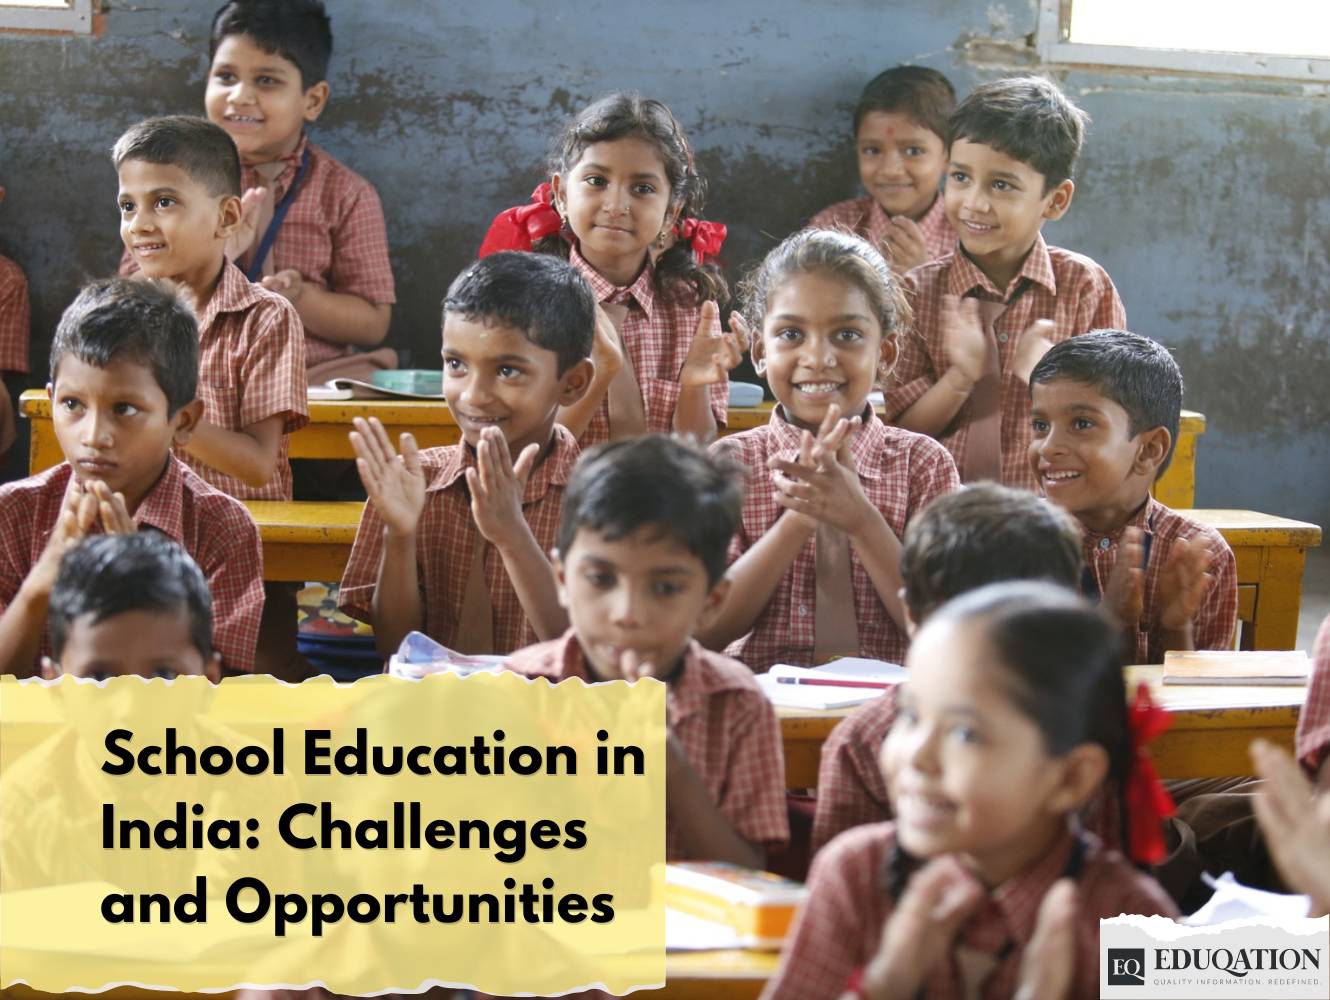 School Education in India: Challenges and Opportunities